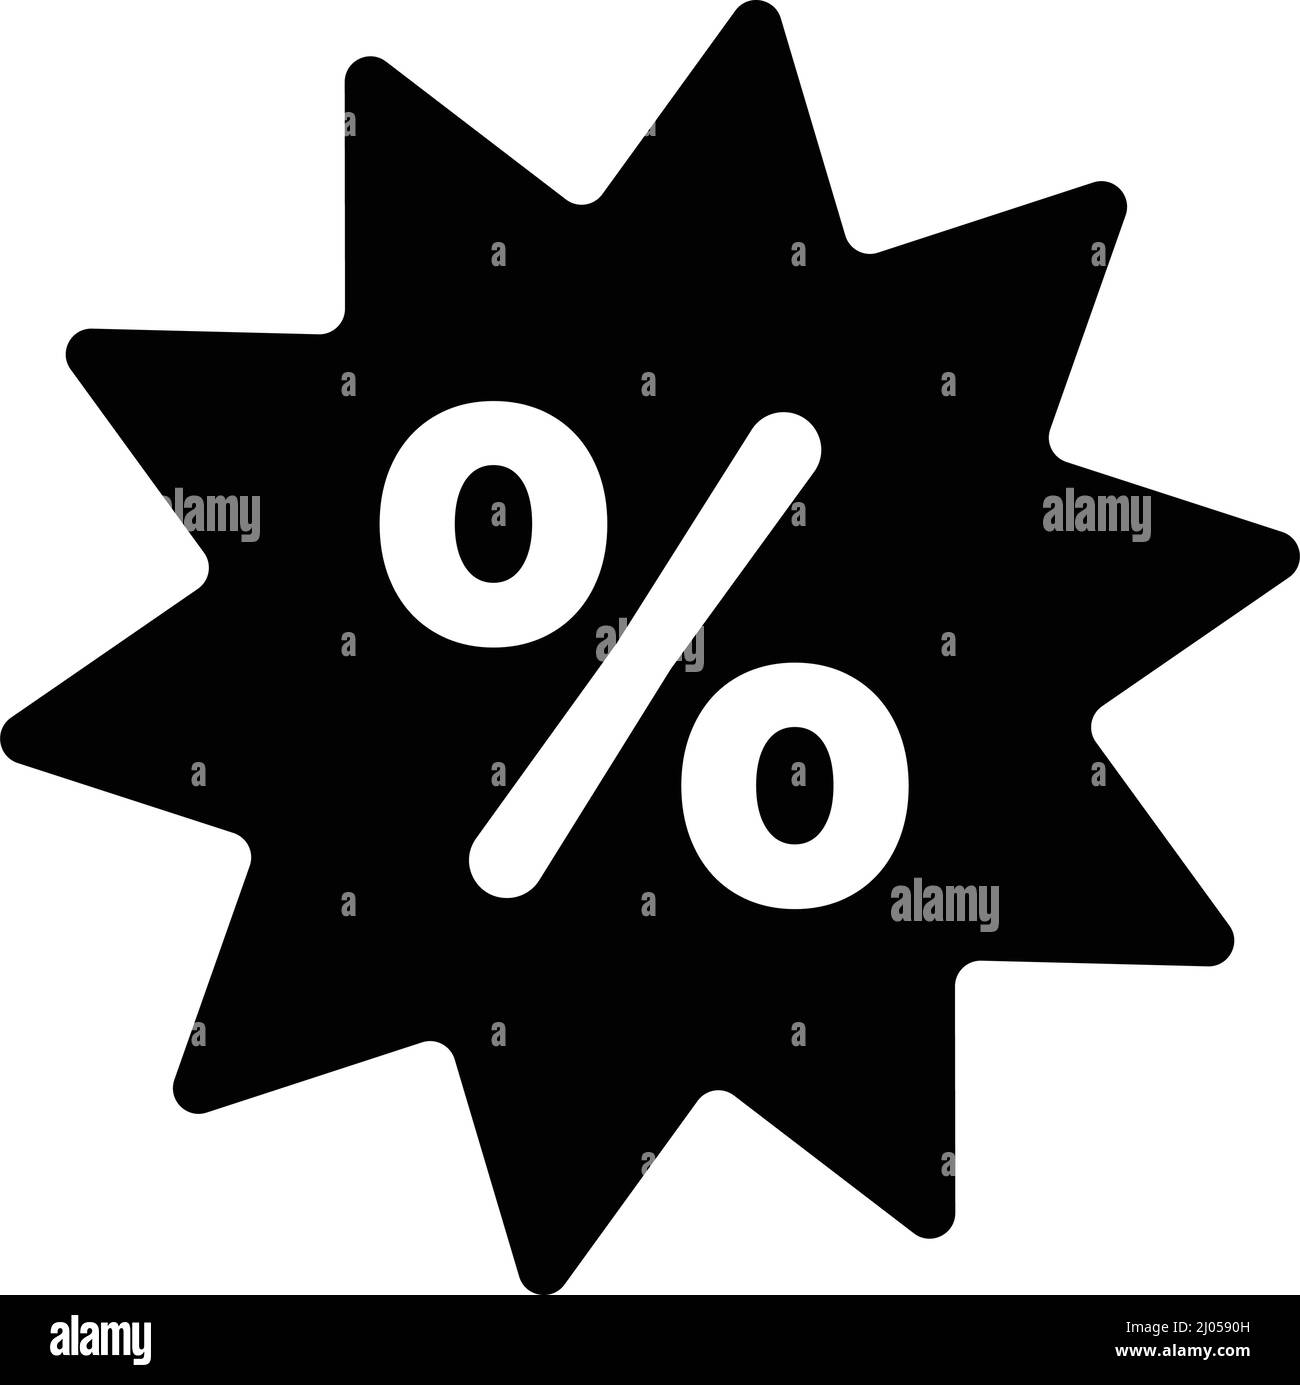 Discount. Percentage sign. A reduction in the price of a product. Editable vectors. Stock Vector